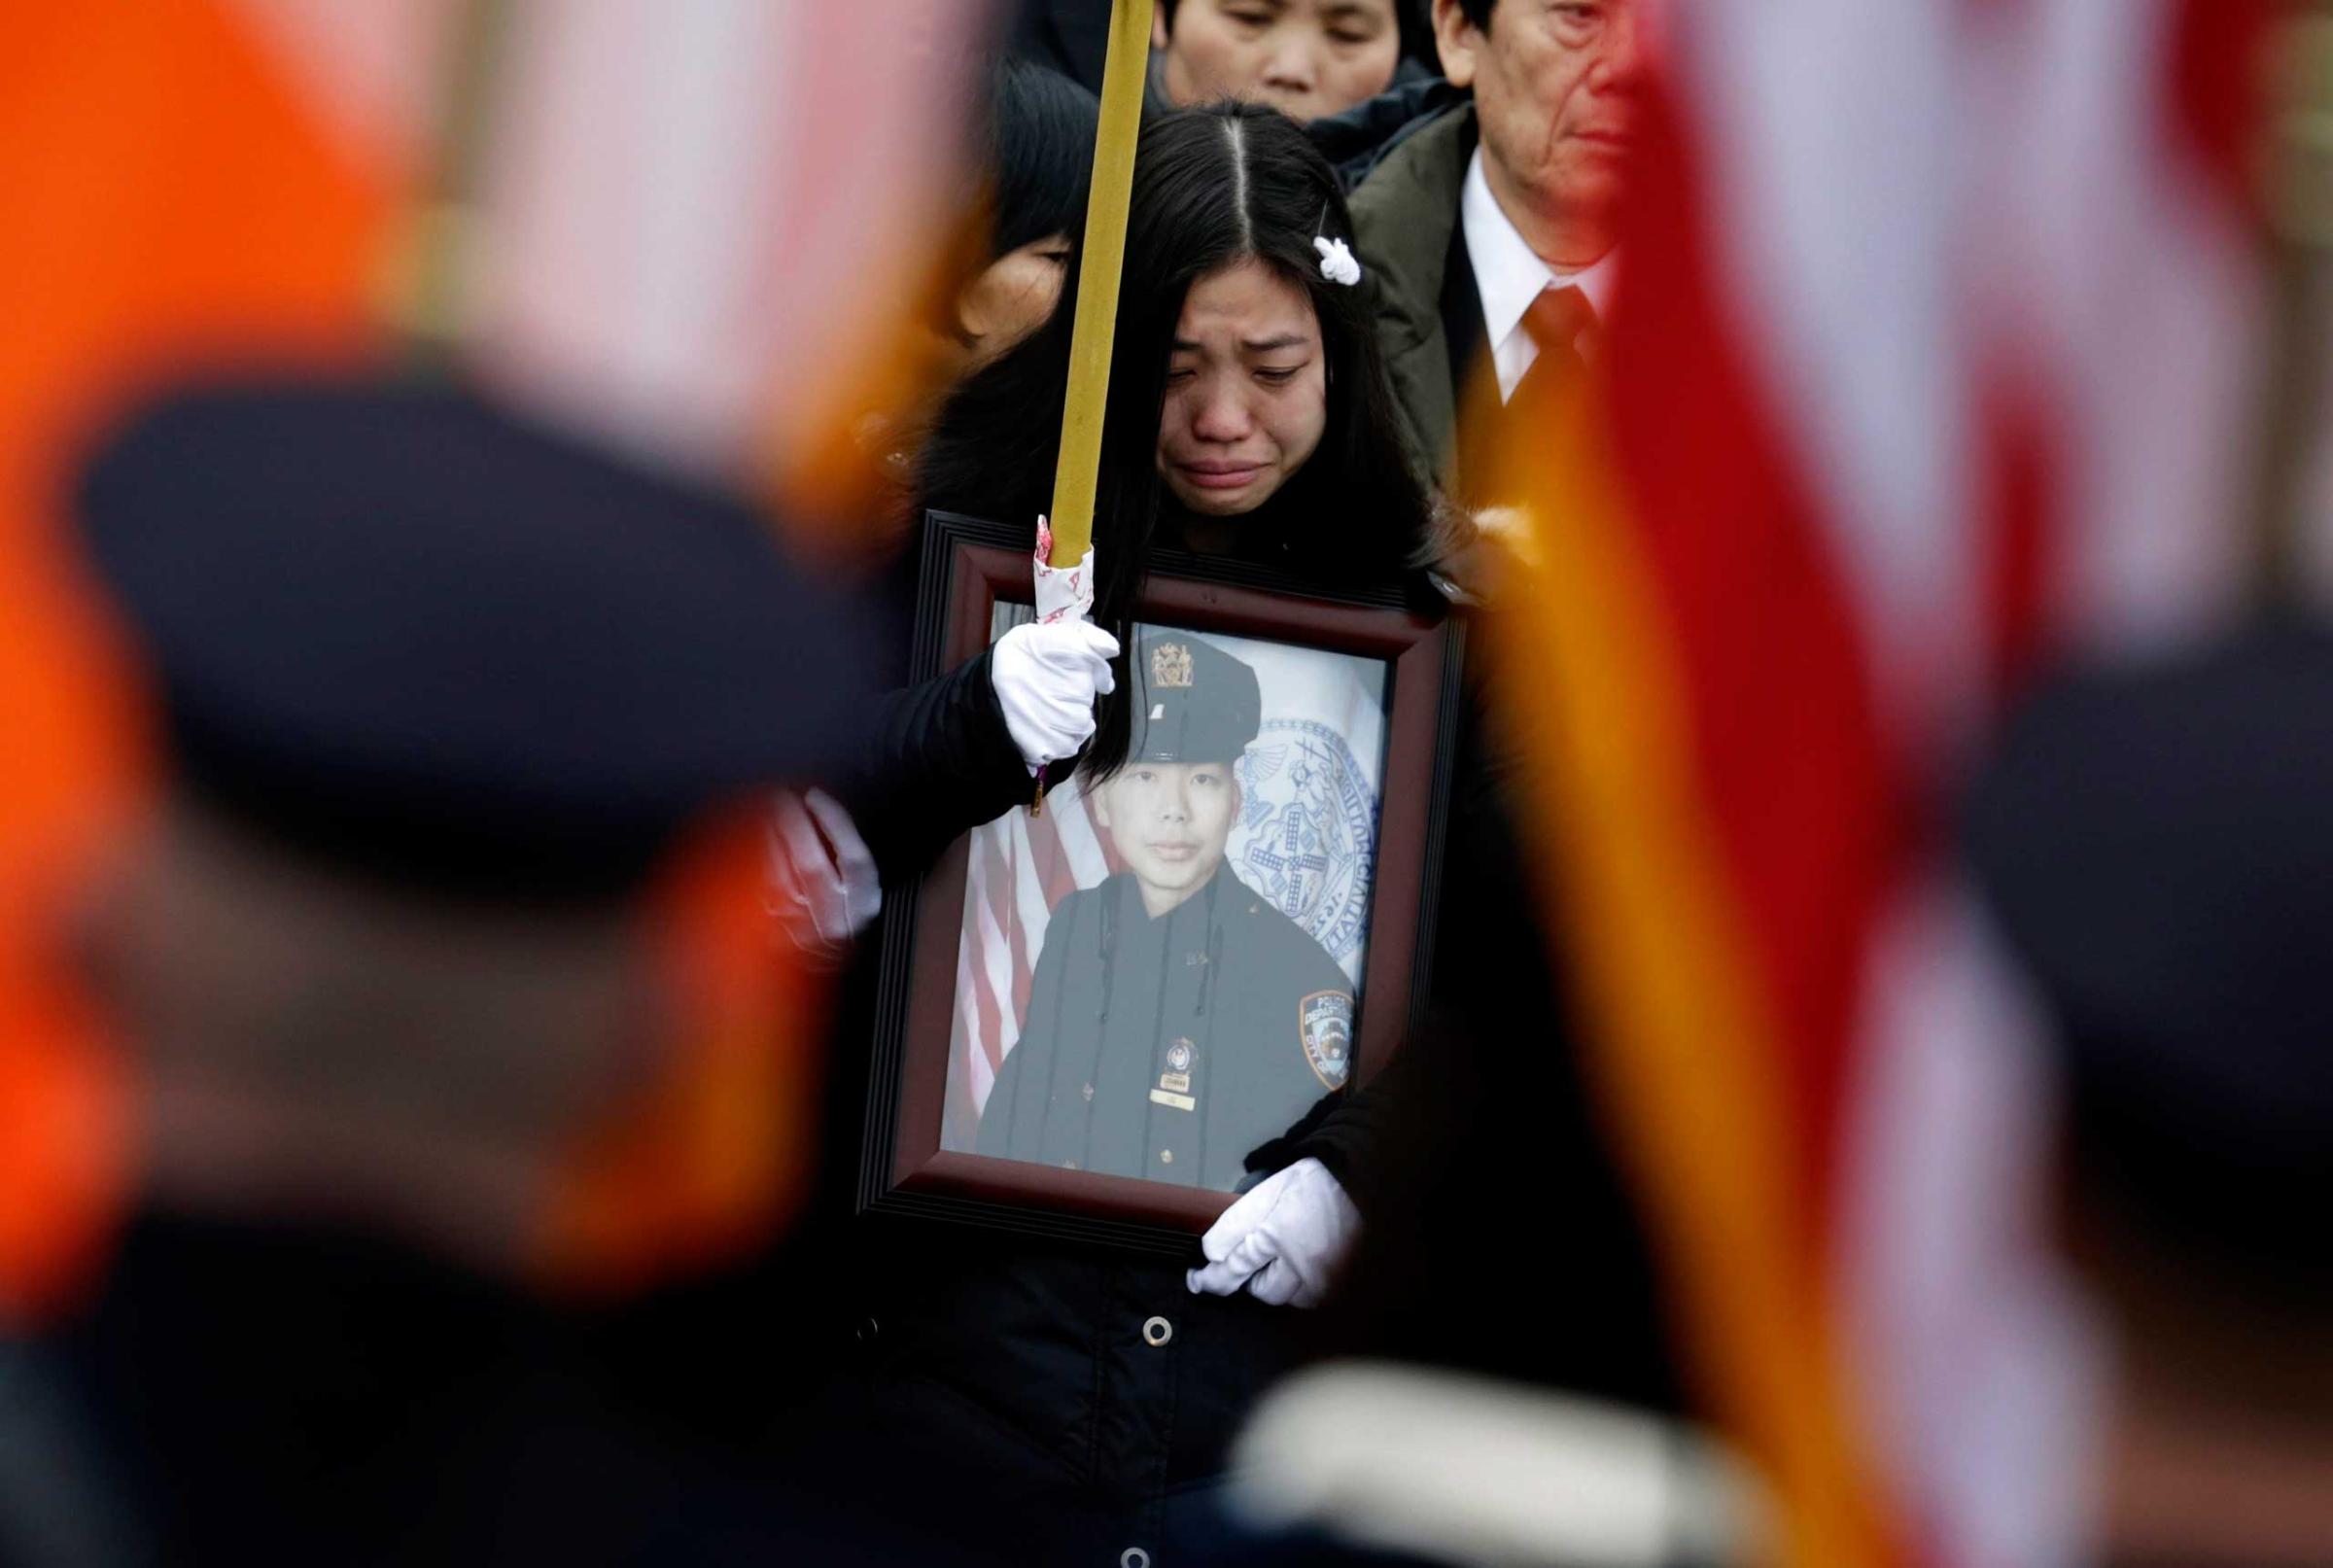 Funeral for New York City Police Officer Officer Wenjian Liu